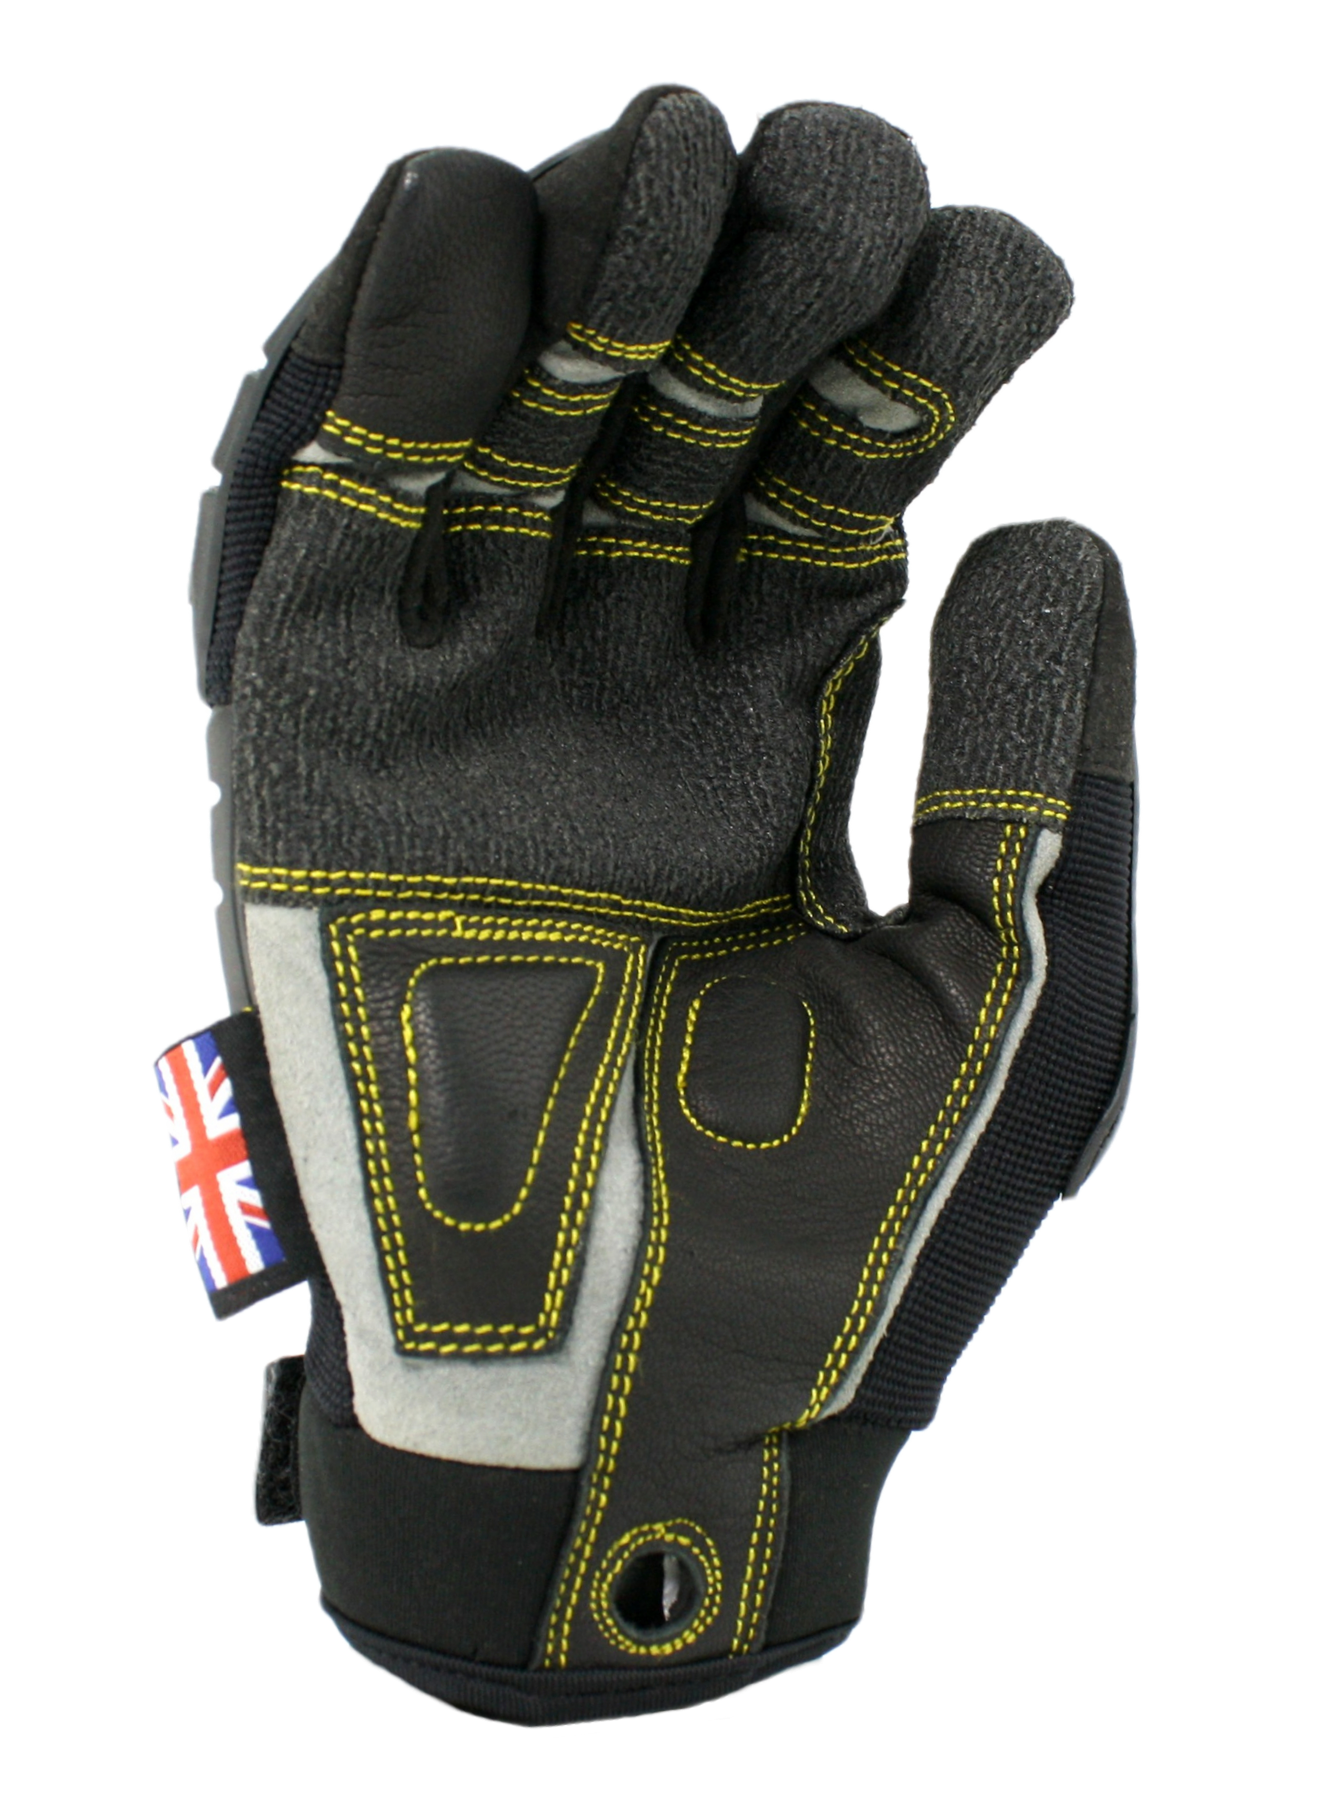 Dirty Rigger Protector Glove, palm view, showing goat skin leather padding and double stitching